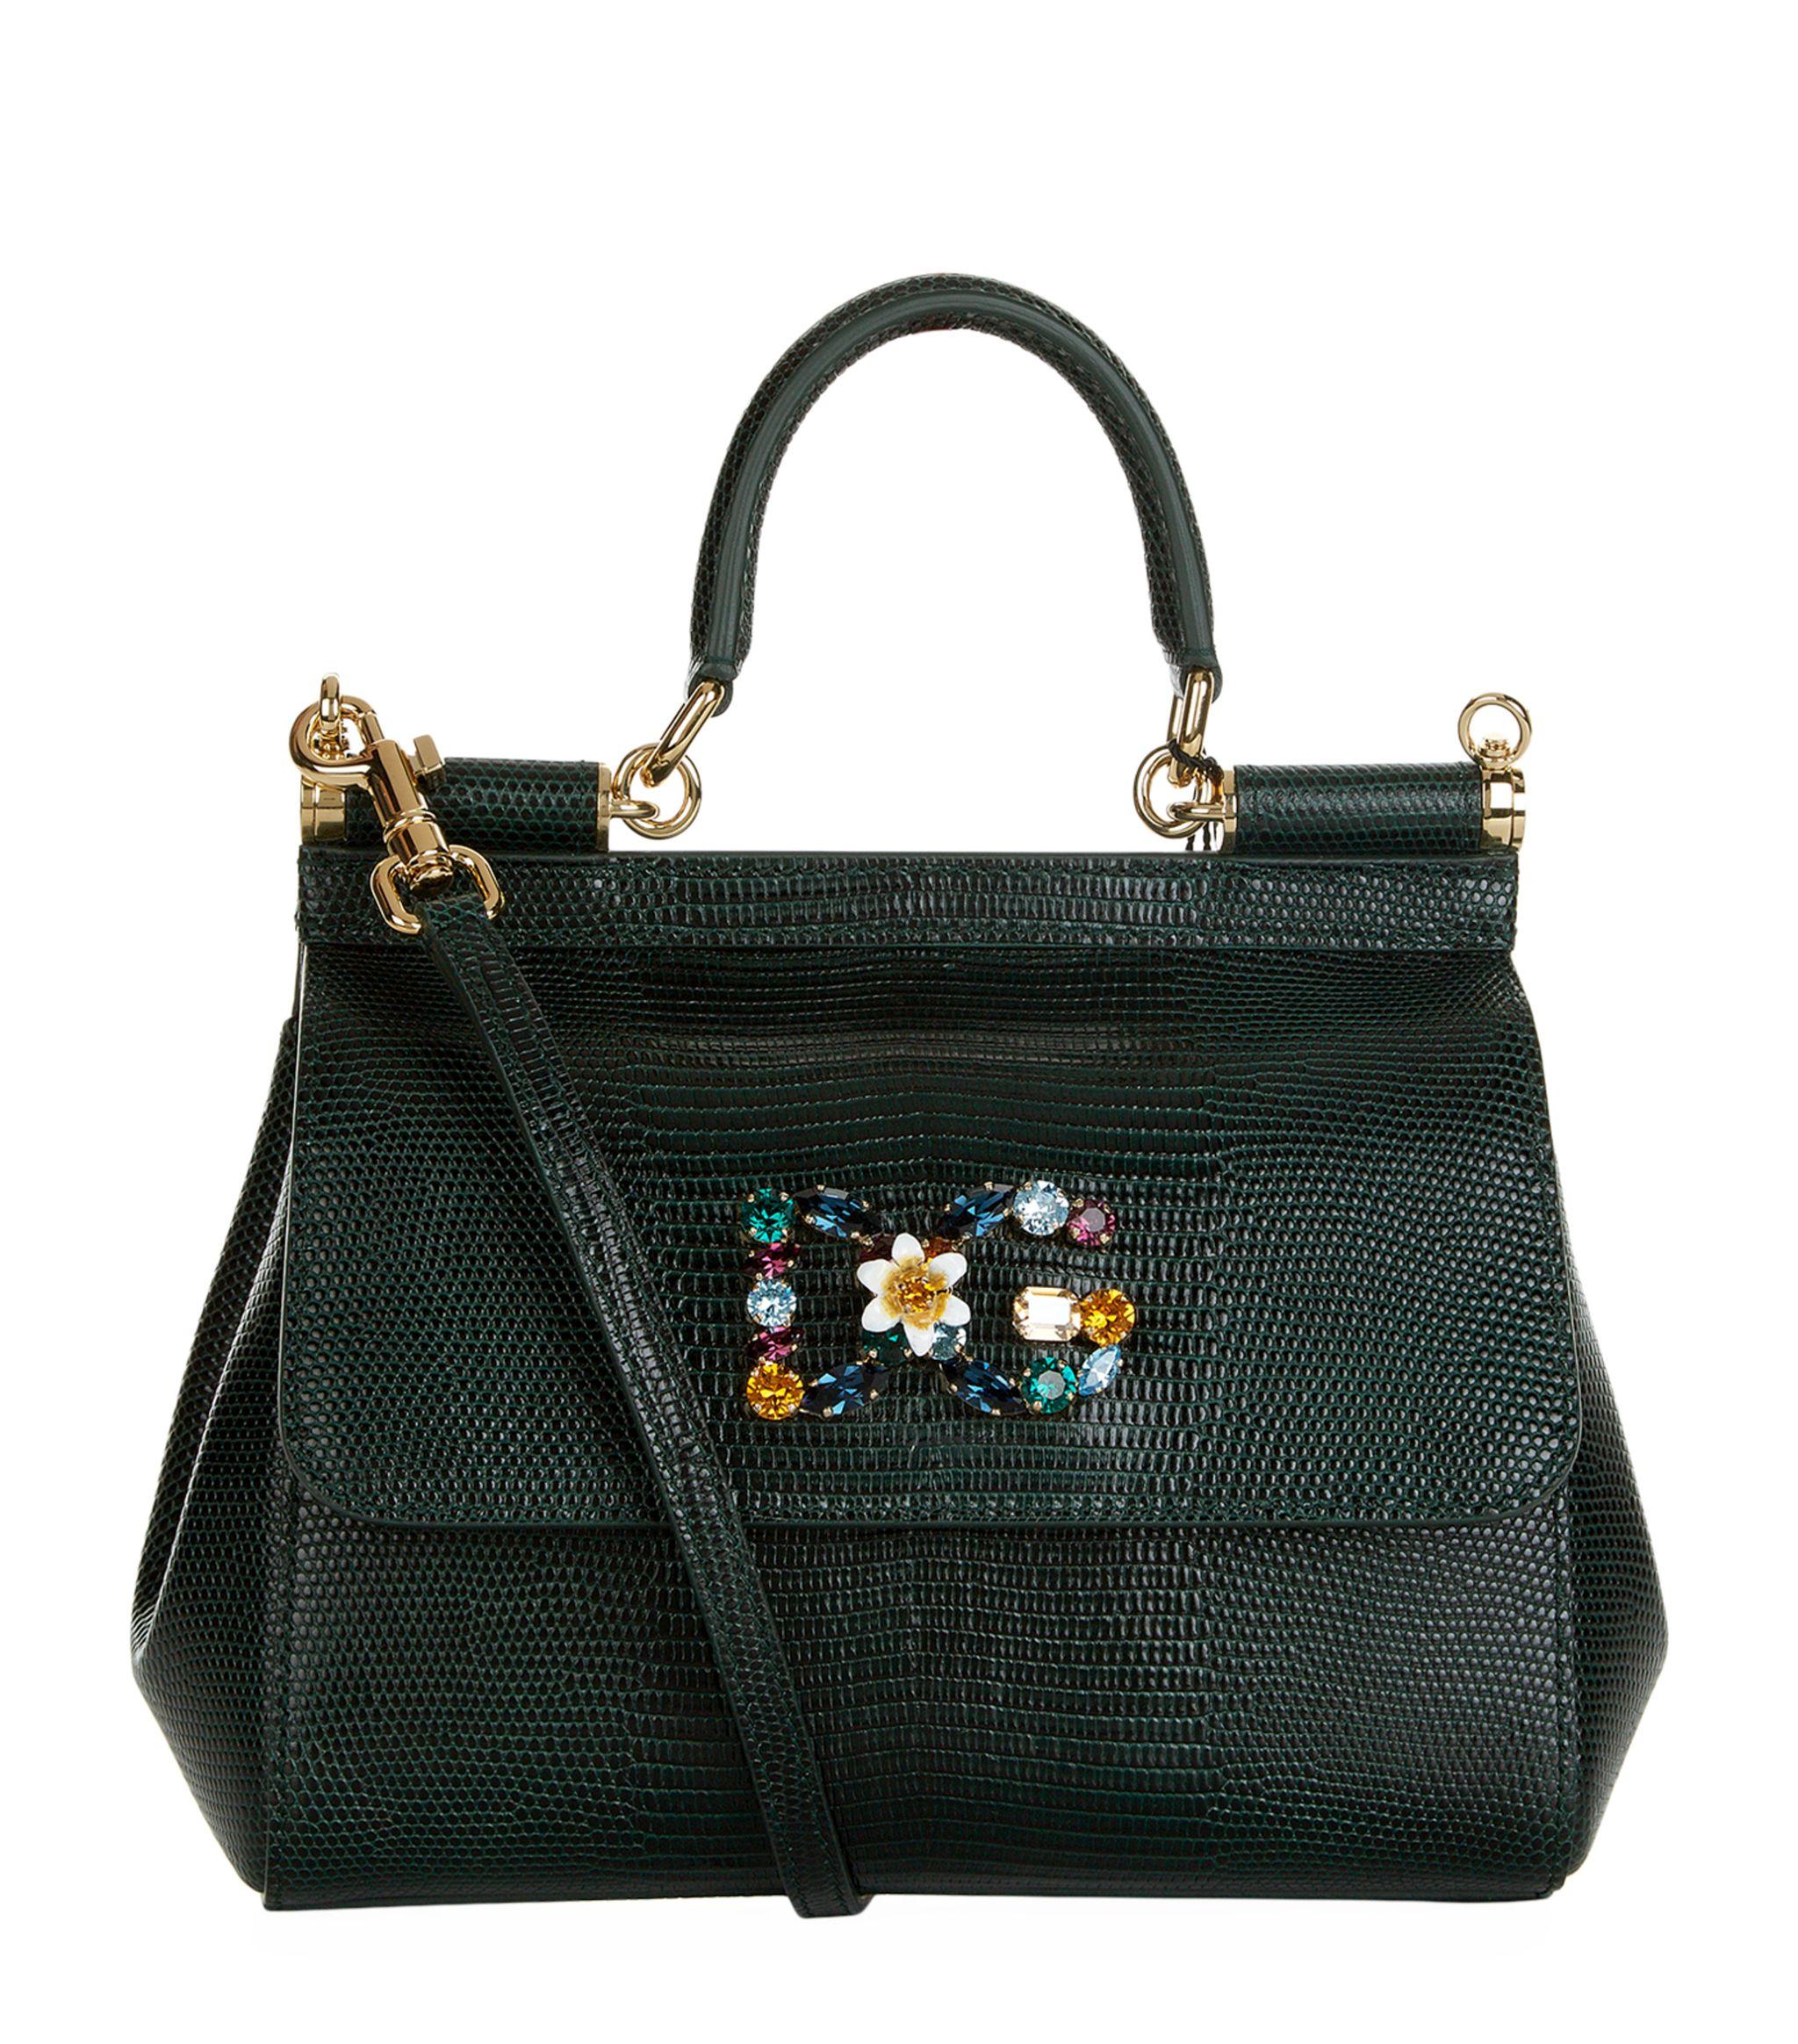 Dolce & Gabbana Leather Small Sicily Top-handle Bag in Black - Lyst